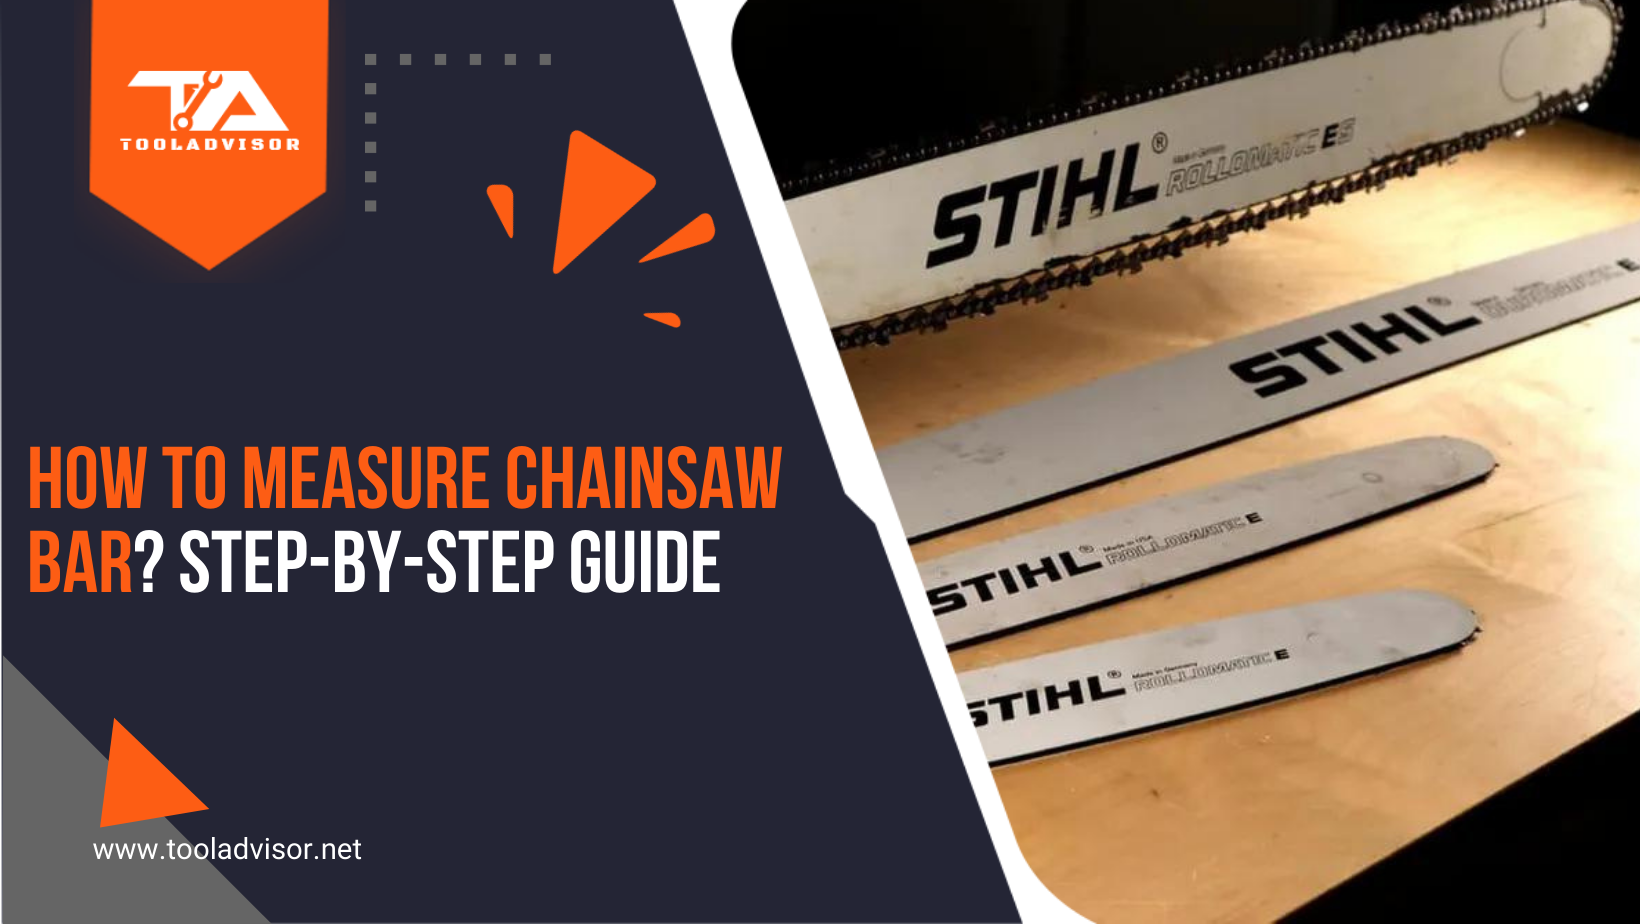 How to Measure Chainsaw Bar